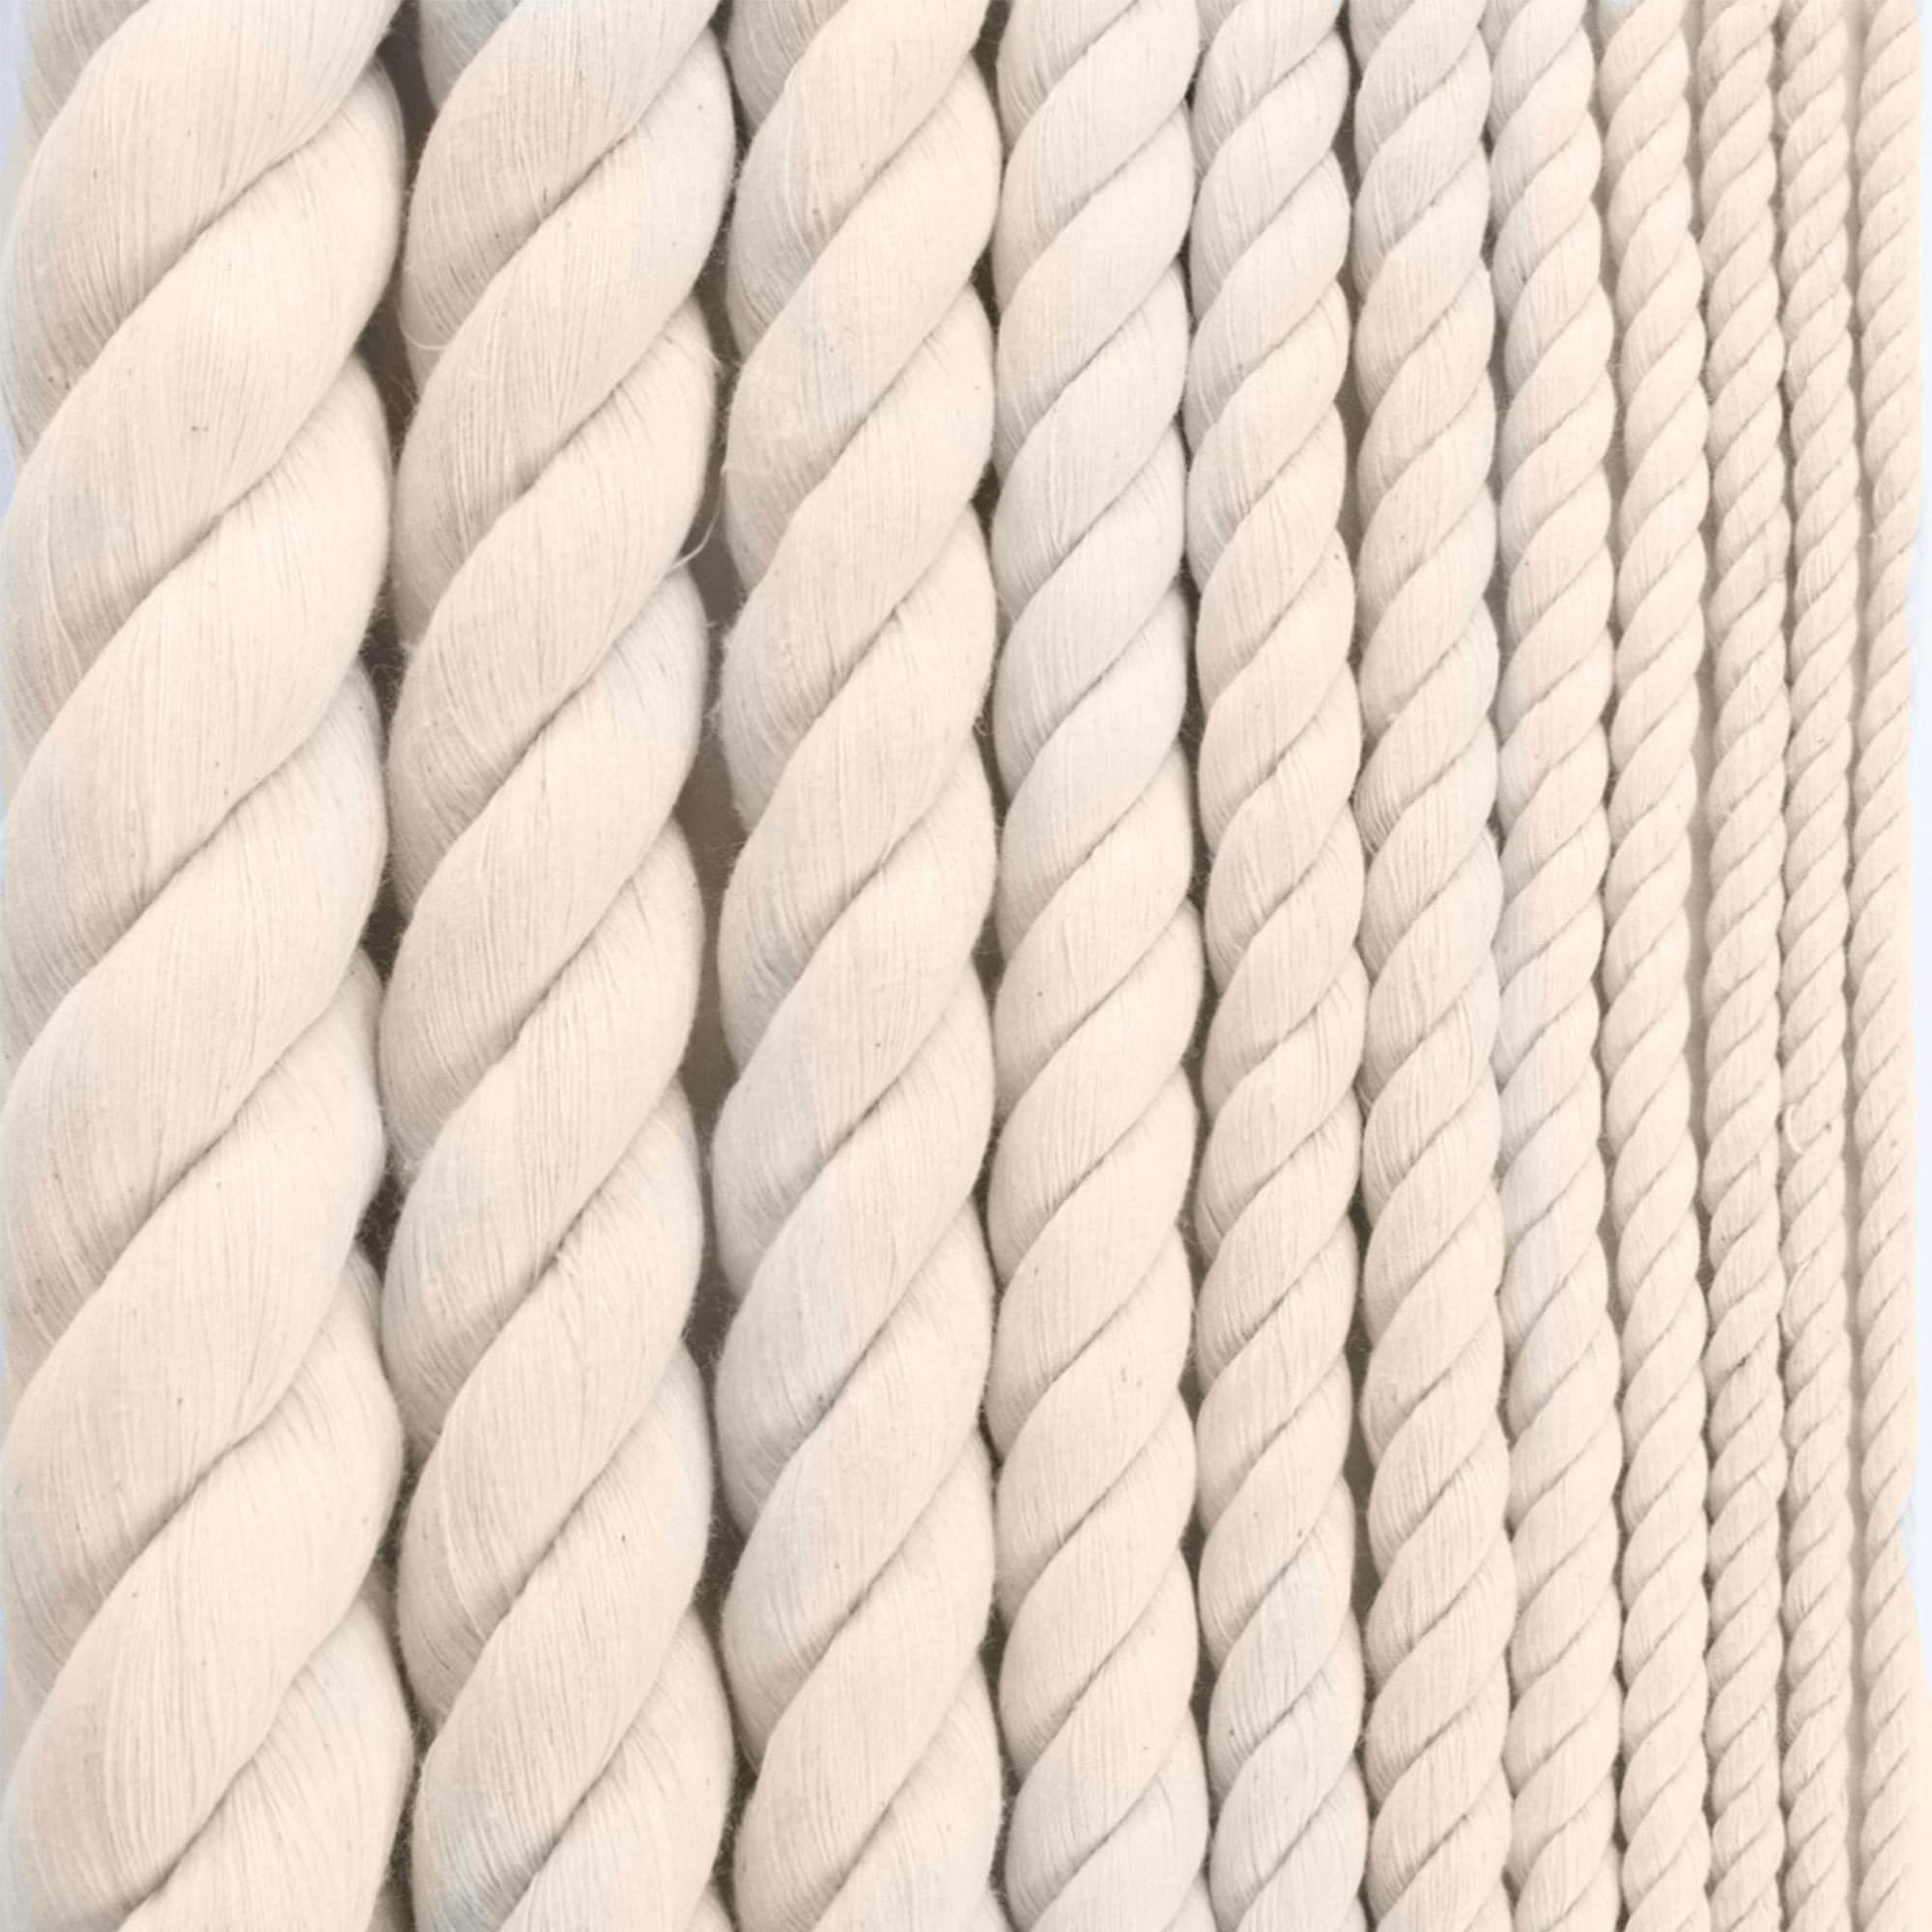 KEILEOHO 1/4 Inch Natural Cotton Rope, 328 FT Length White Clothesline Cord  Craft Knitting Thread String Wall Hanging Rope for Garden Plant DIY